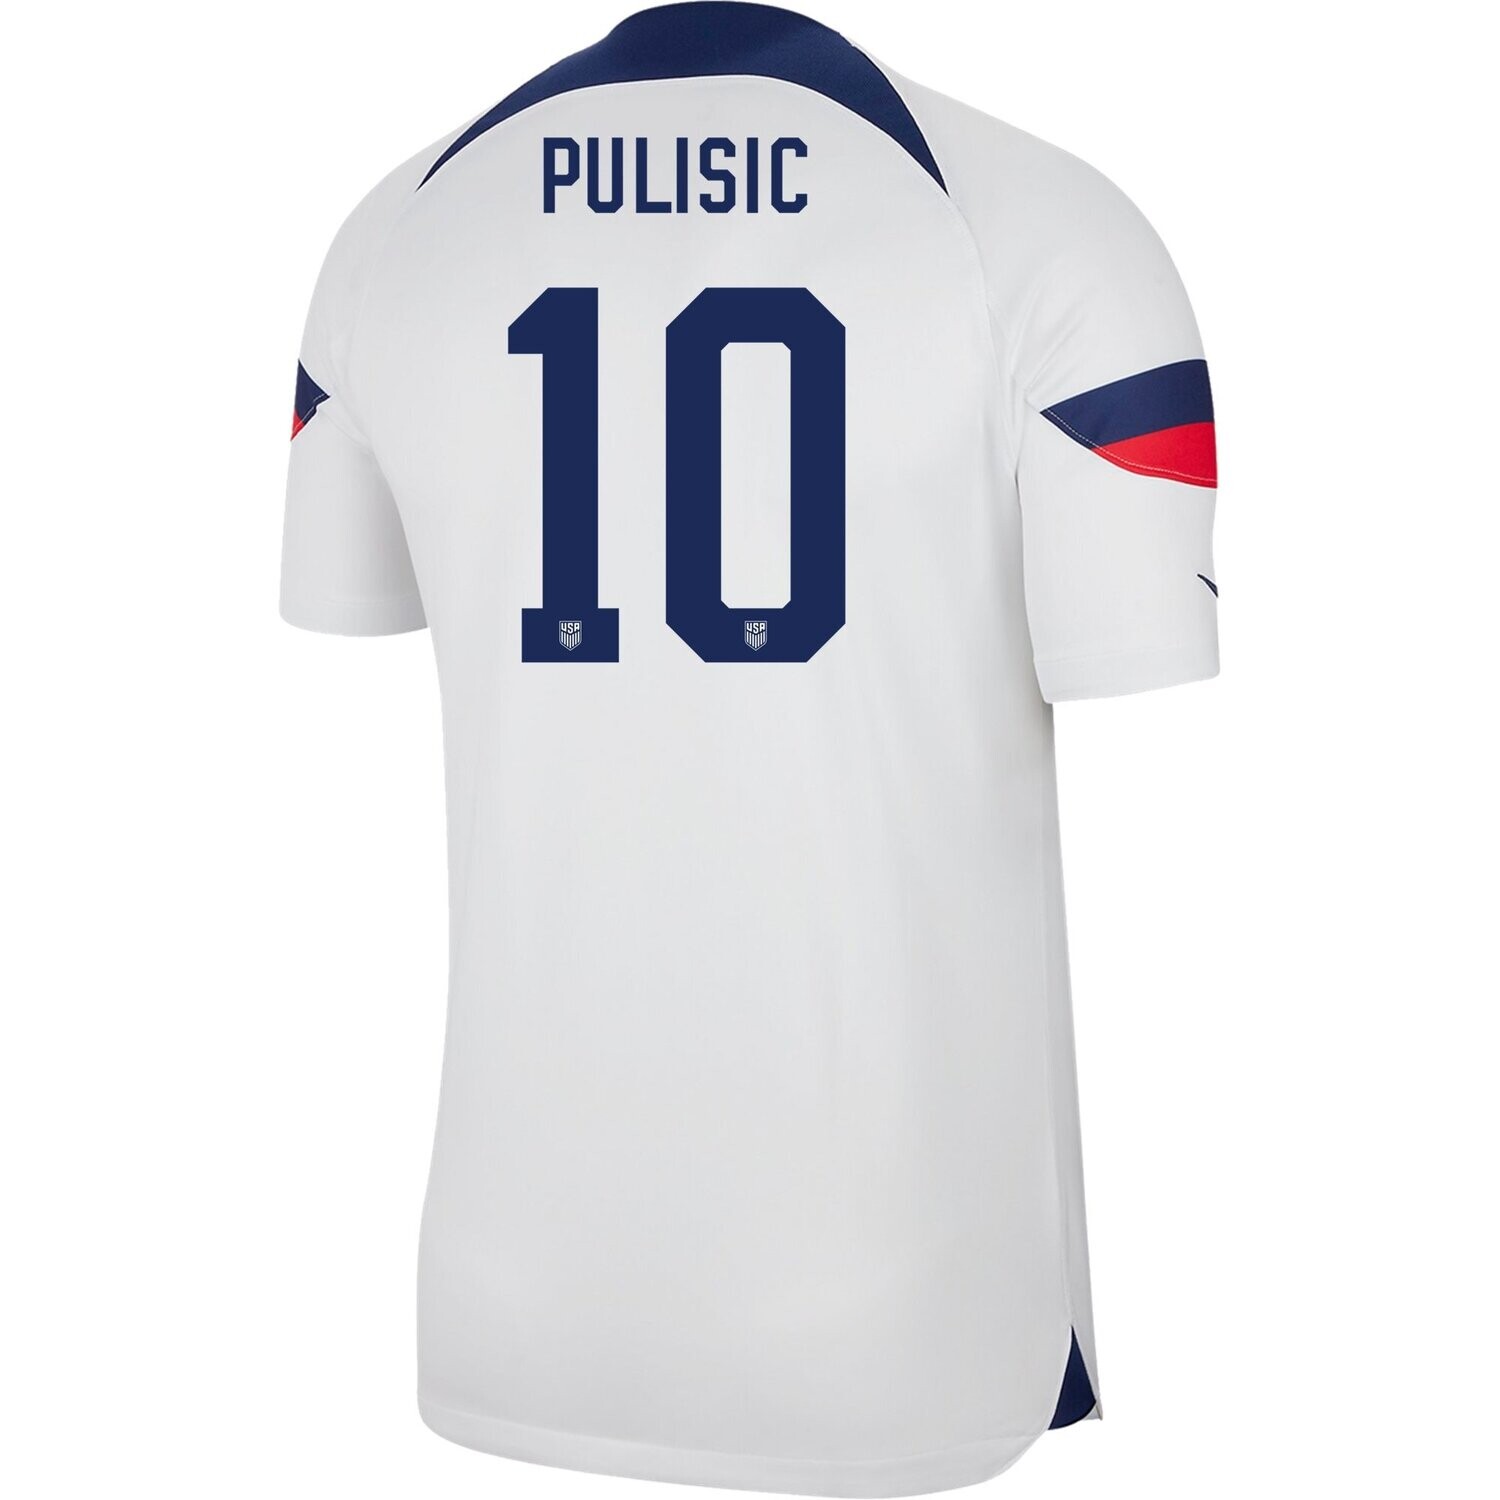 USA 2022 Home Player Version Soccer Jersey Pulisic 10 (EURO SIZING)